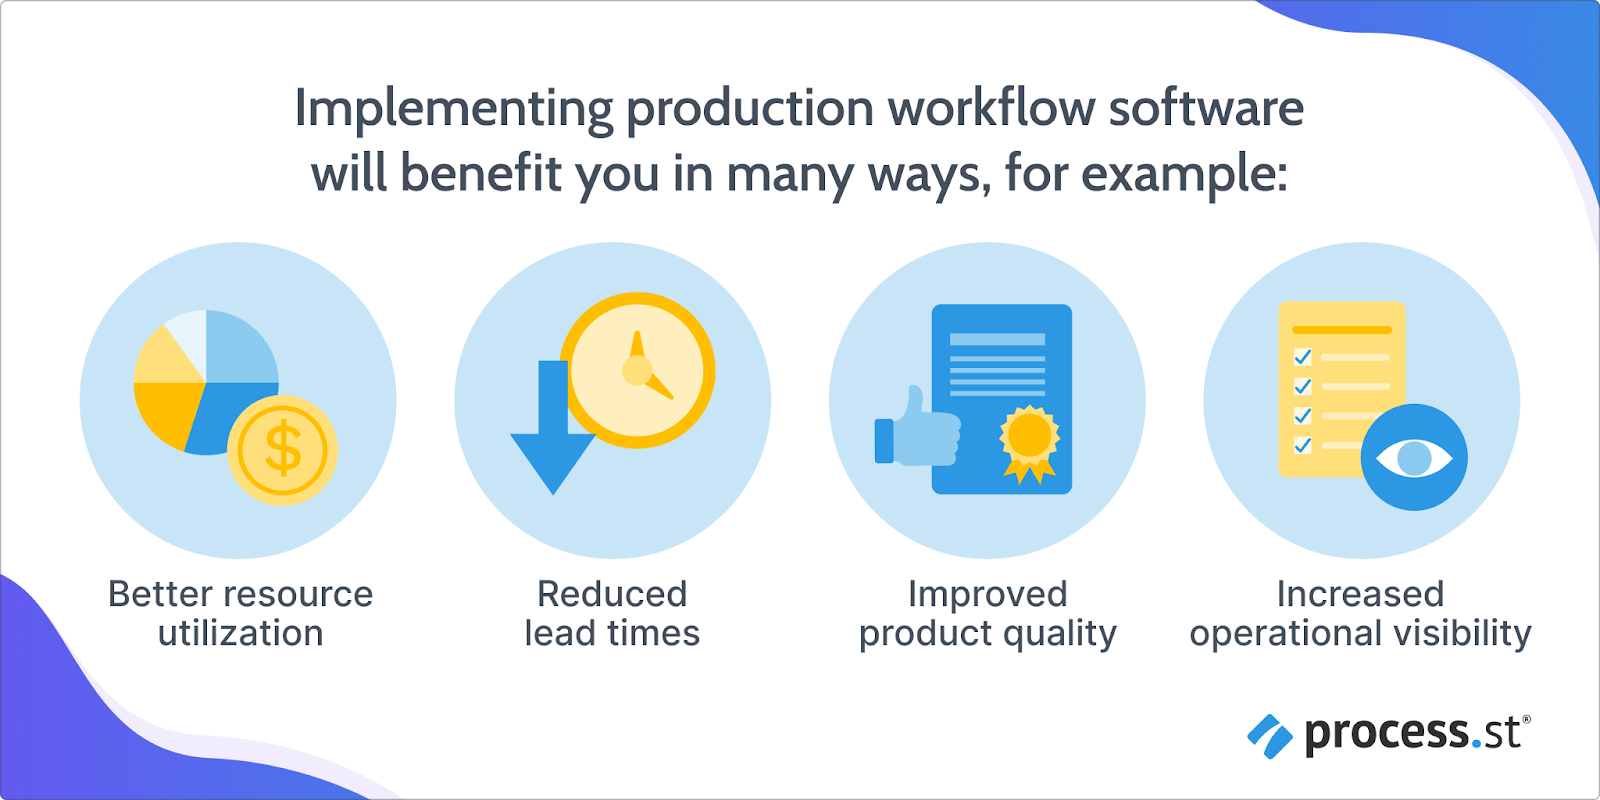 image showing the benefits of production workflow software